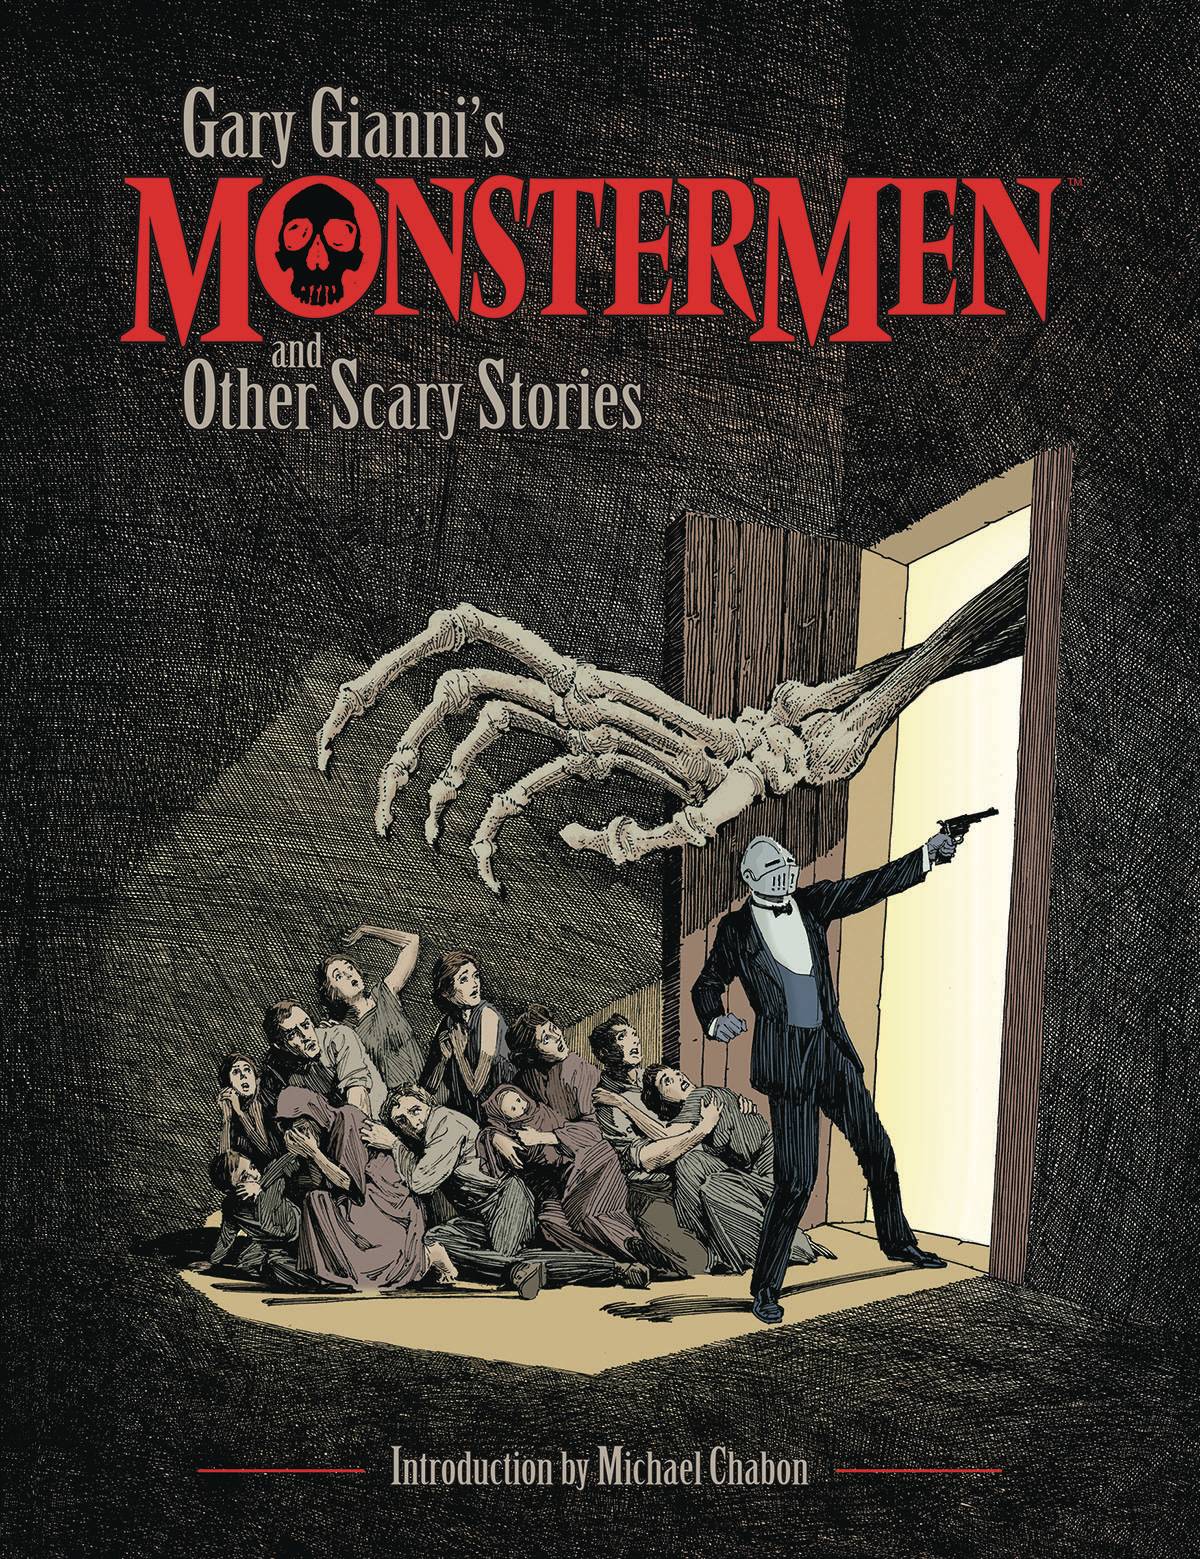 GARY GIANNI MONSTERMEN & OTHER SCARY STORIES TP